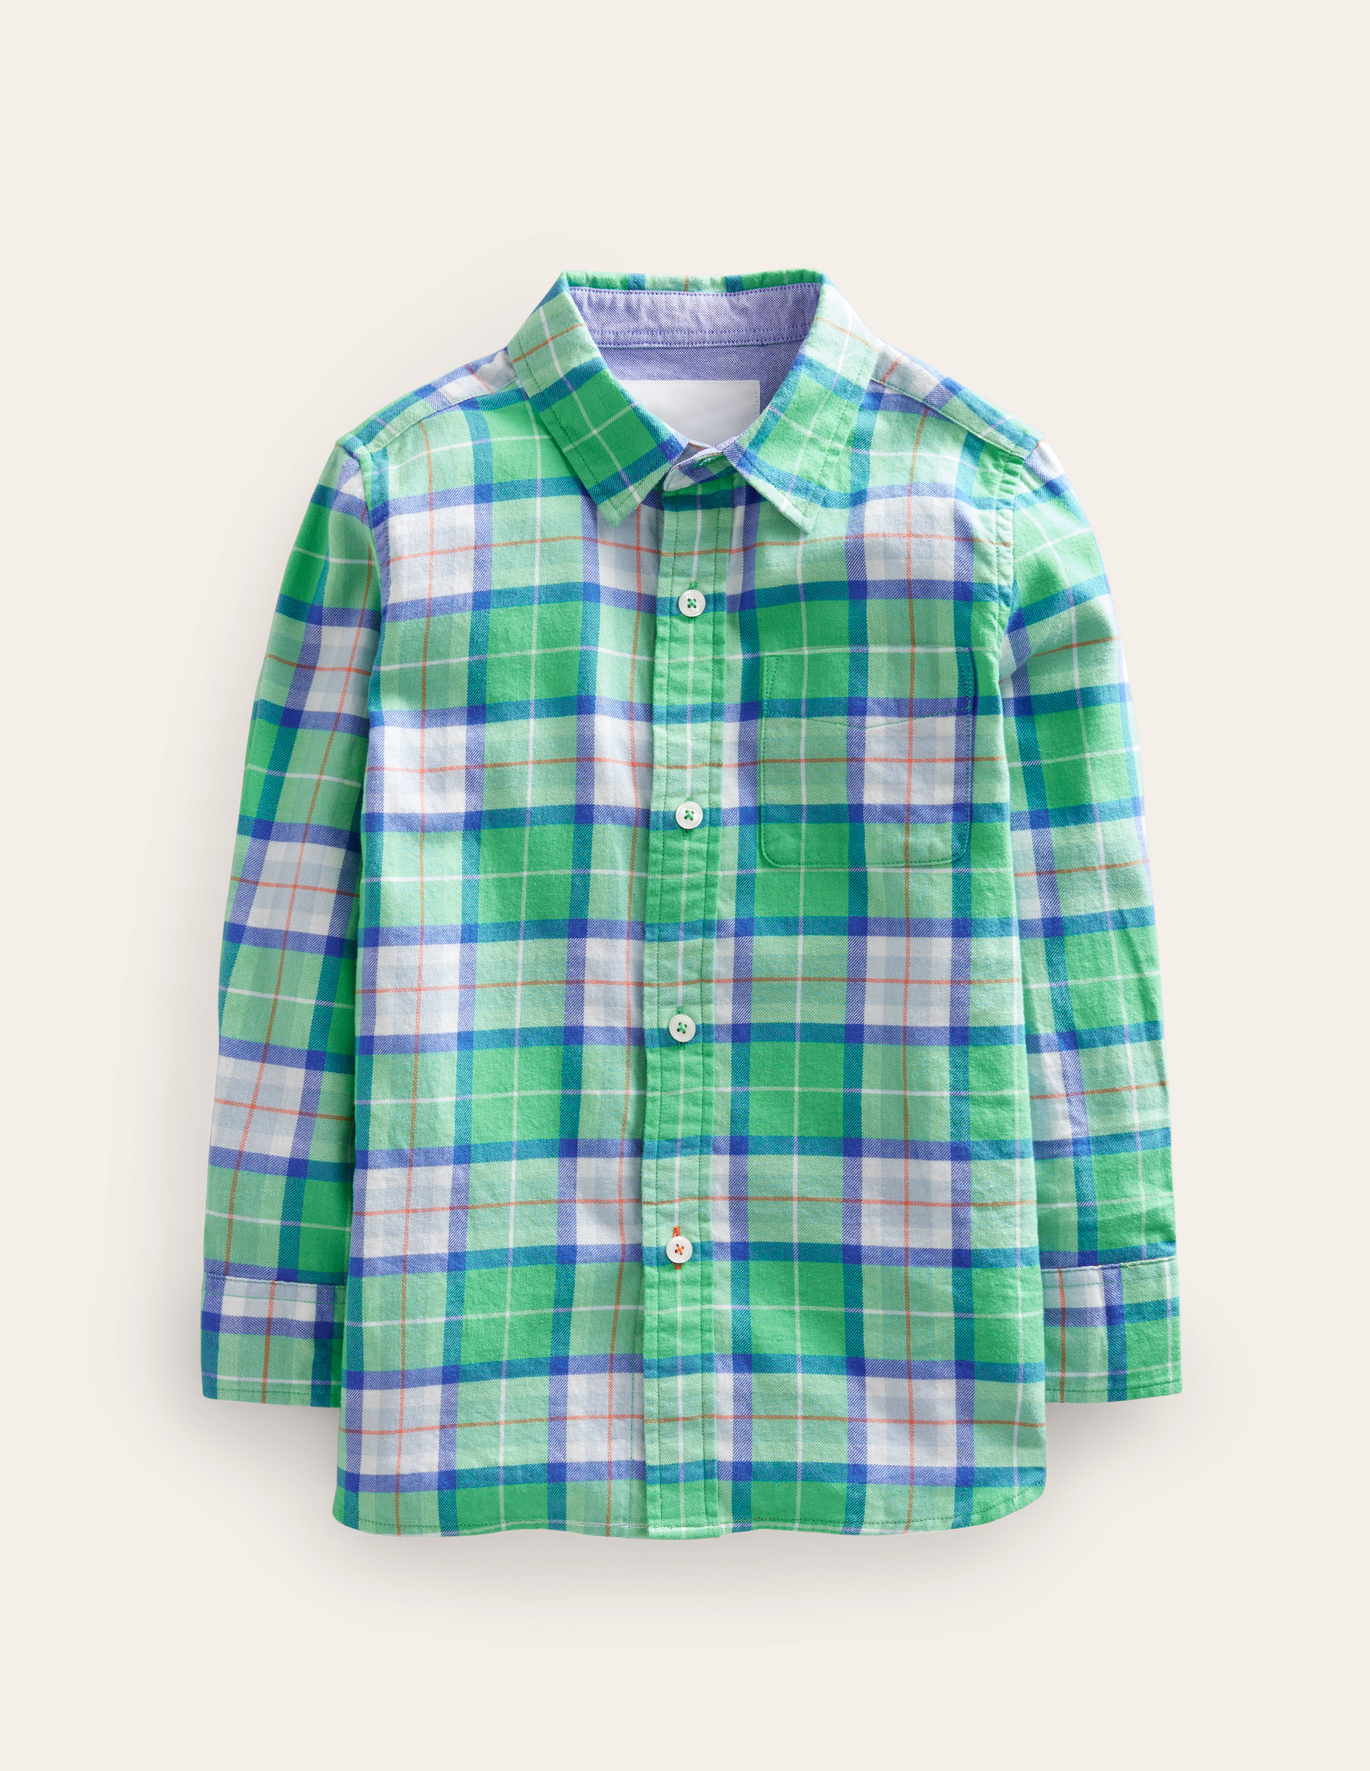 Boden Casual Twill Shirt - Soft Green Check